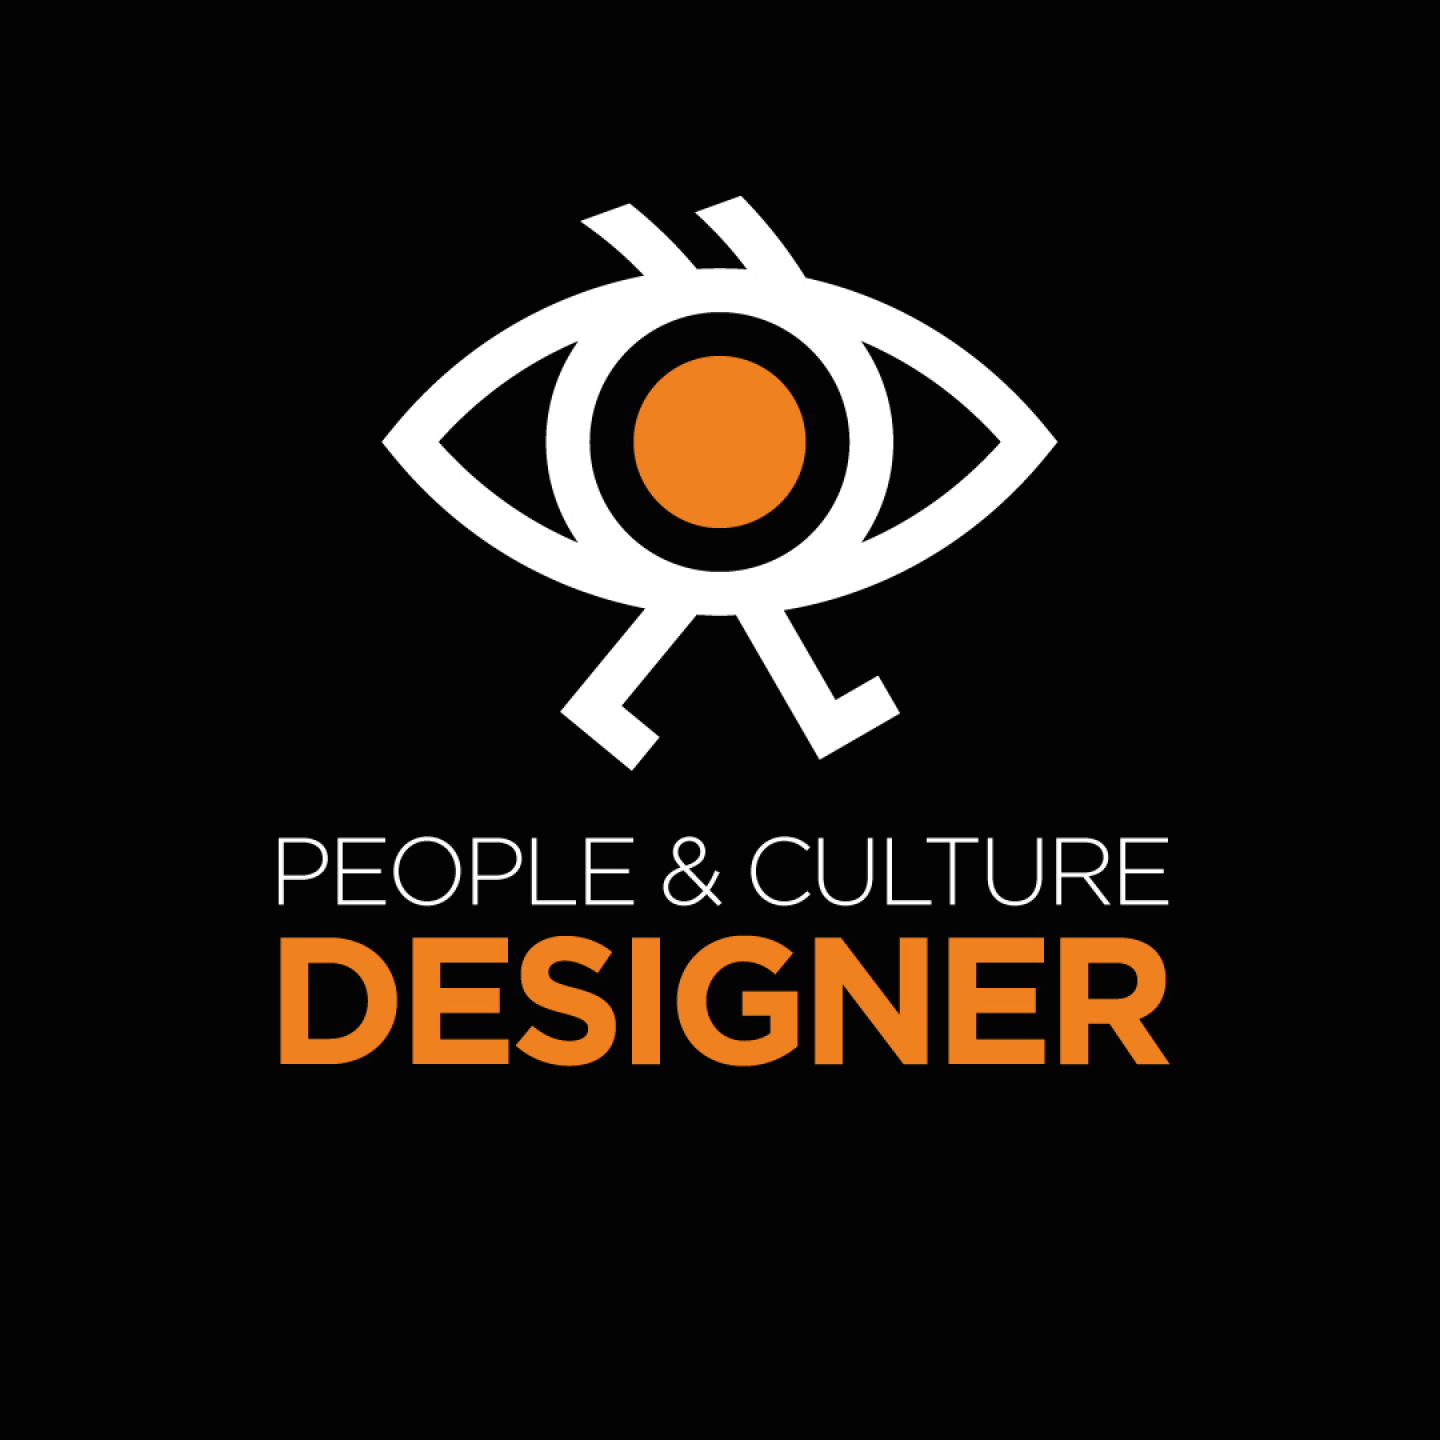 We are looking for NEW PEOPLE & CULTURE DESIGNER